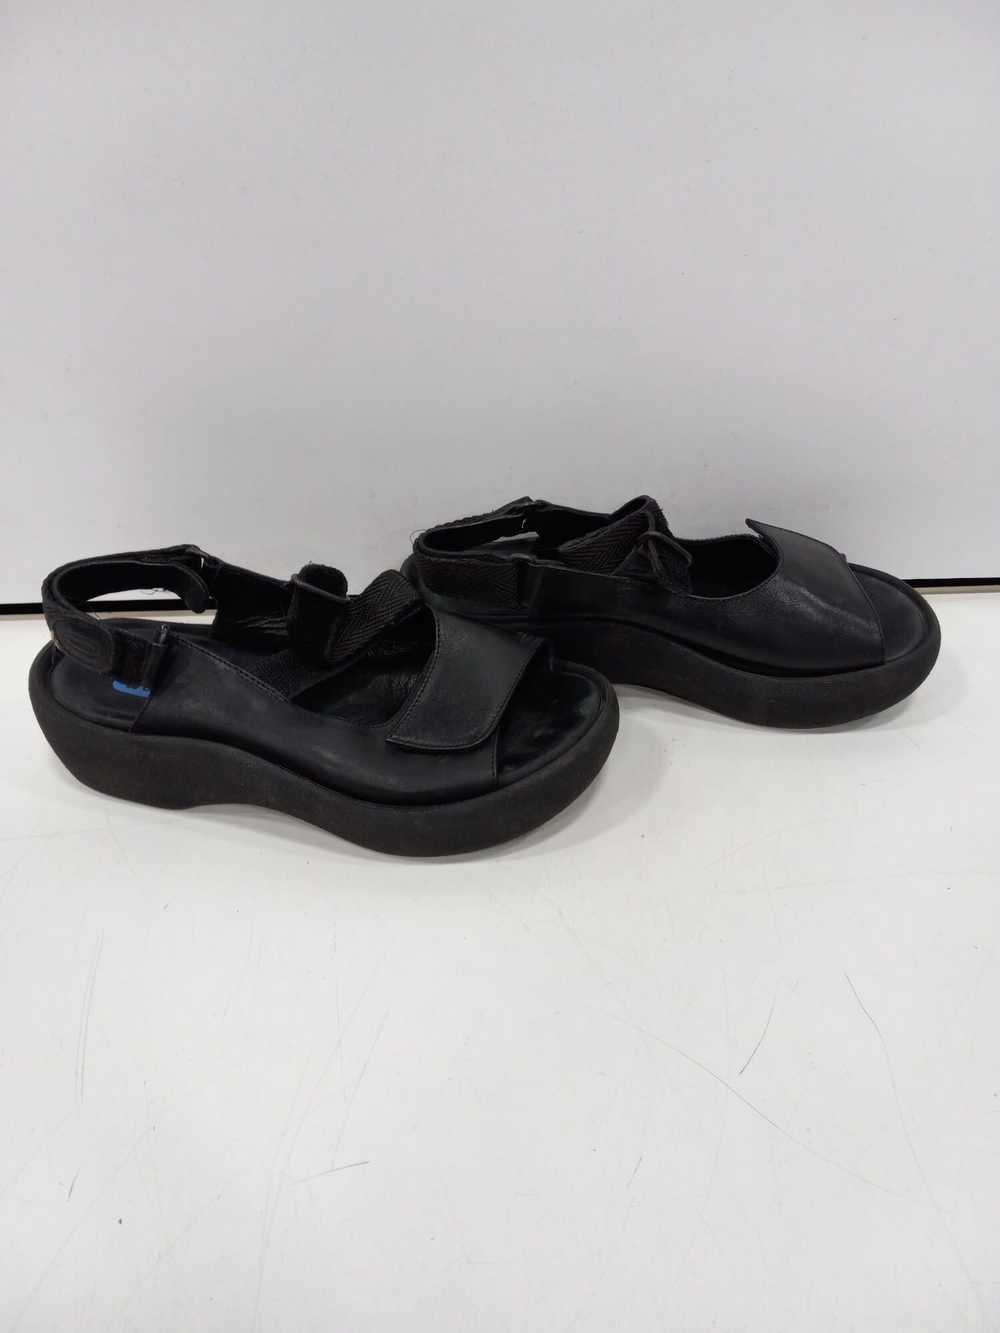 Wolky Women's Black Leather Sandals Size 37 - image 3